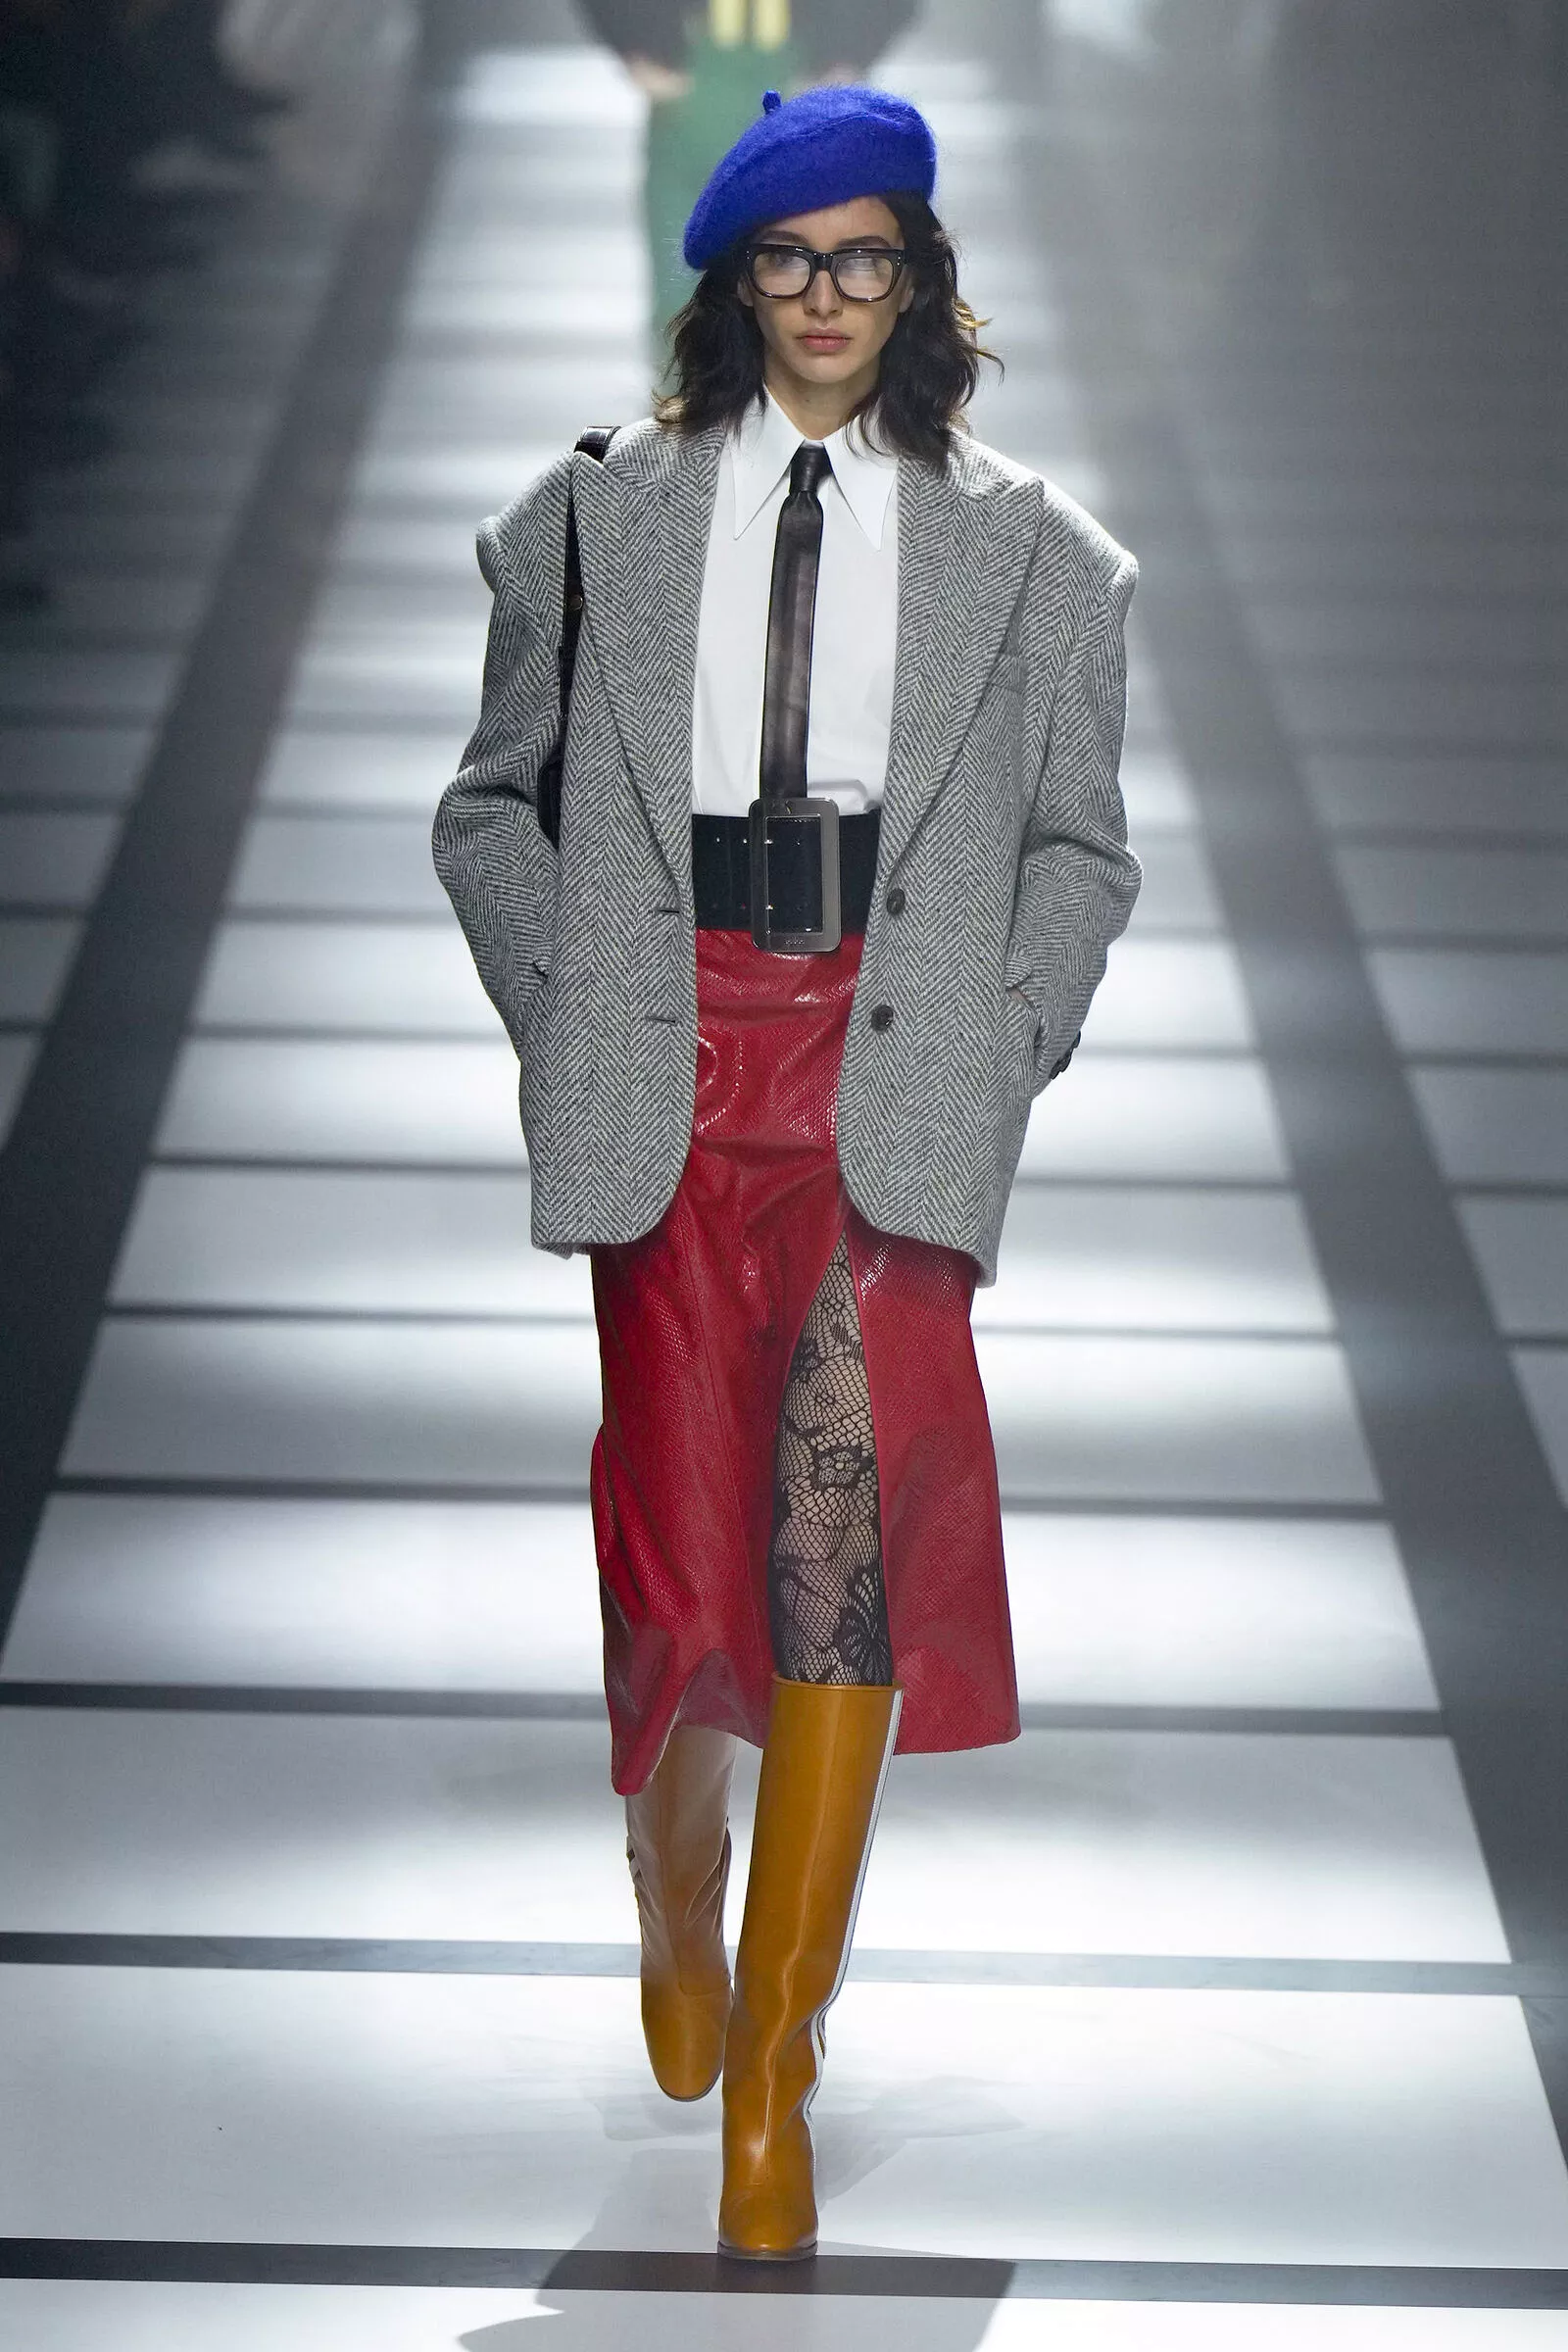 Gucci Men's AW22 Style Guide - THE FALL